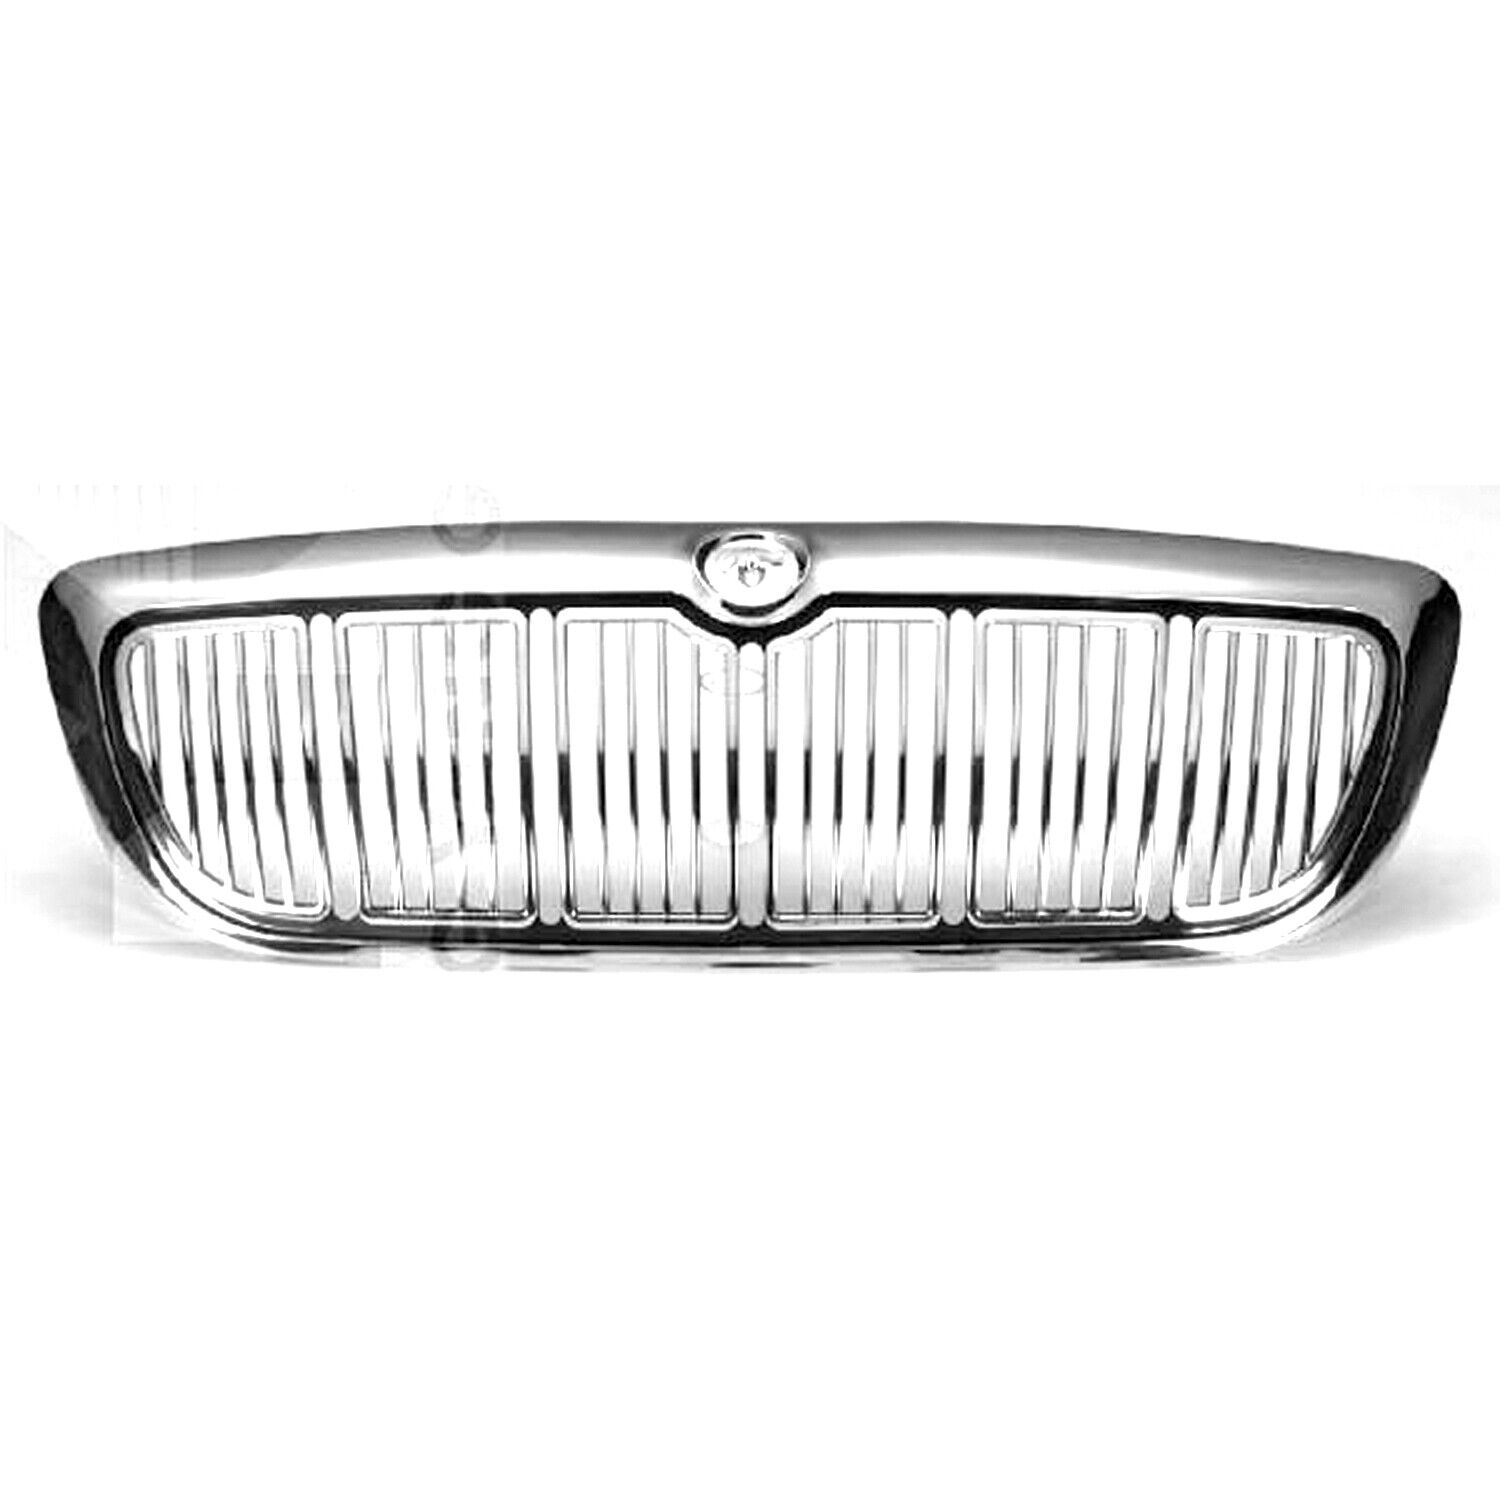 FO1200353 New Grille Fits 1998-2002 Mercury Grand Marquis